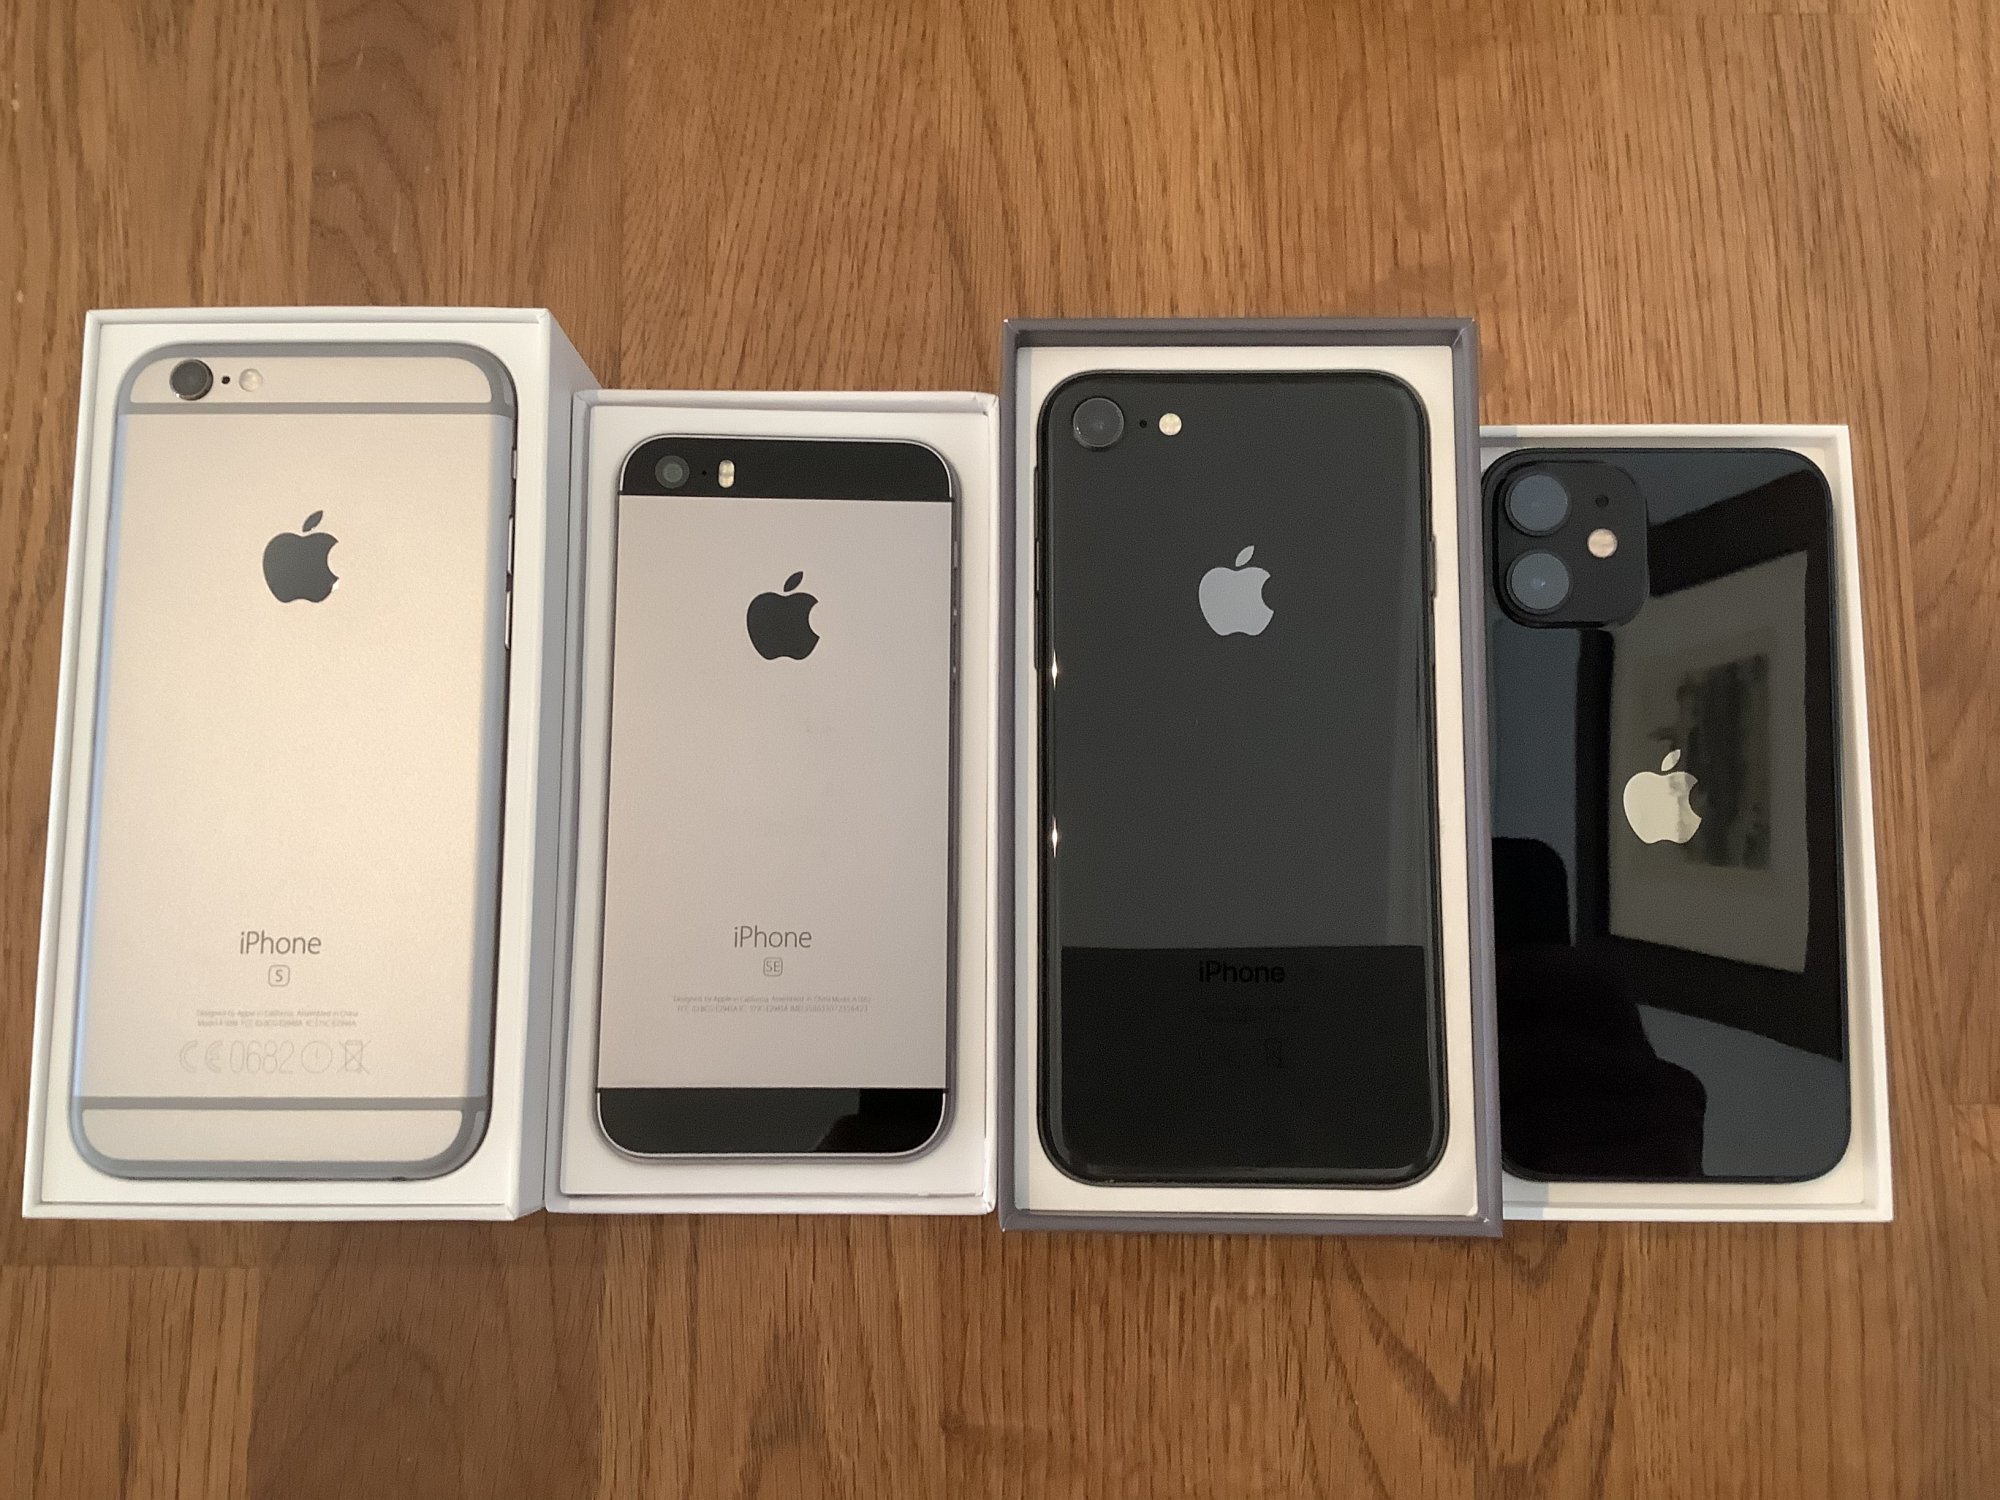 Post your iPhone collection